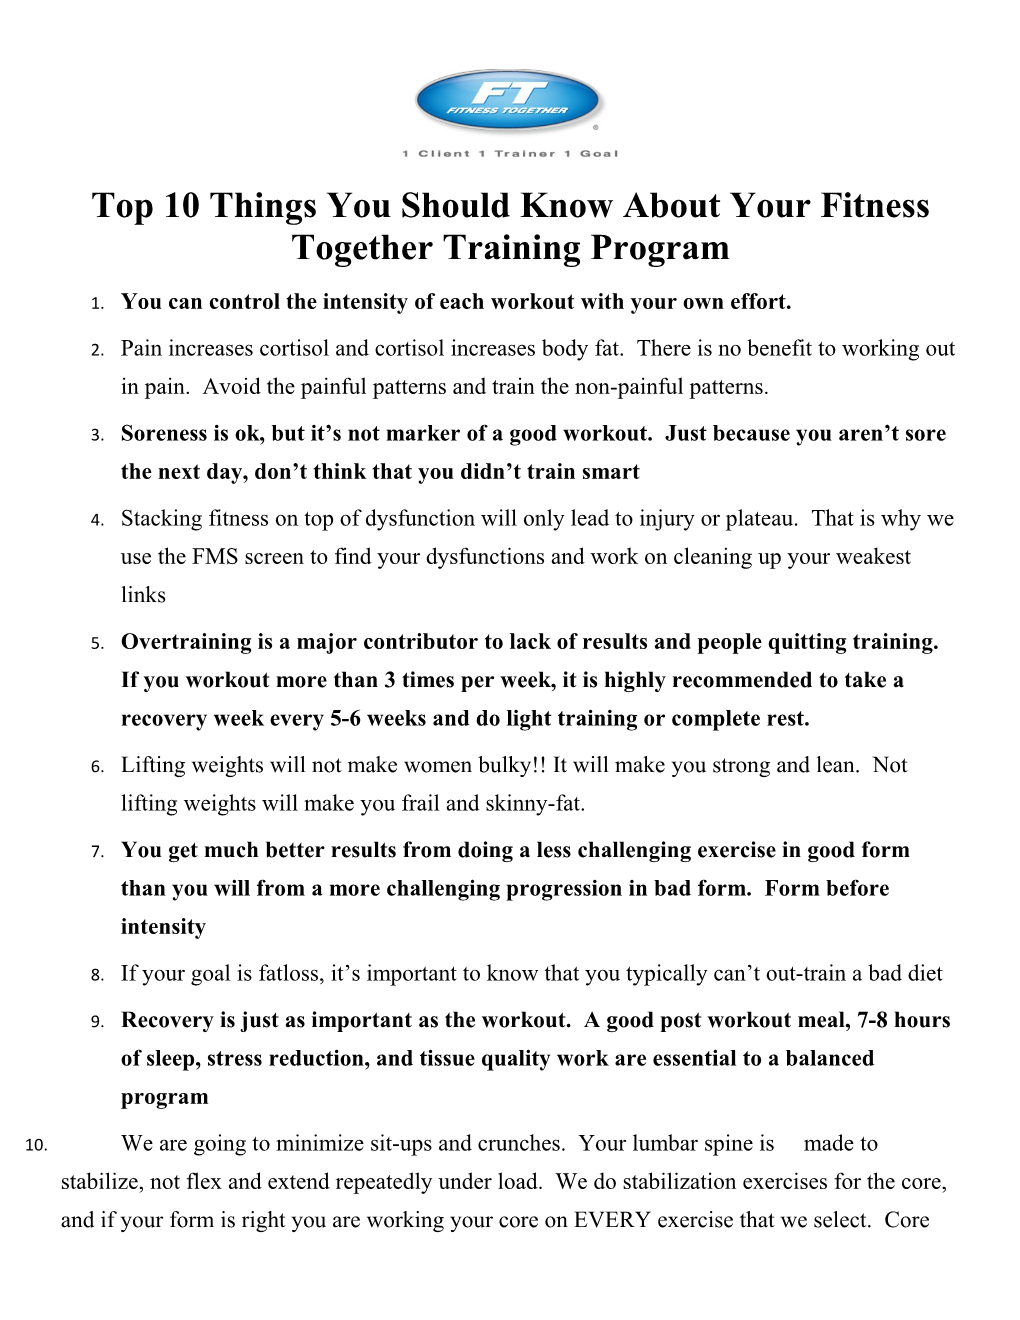 Top 10 Things You Should Know About Your Fitness Together Training Program